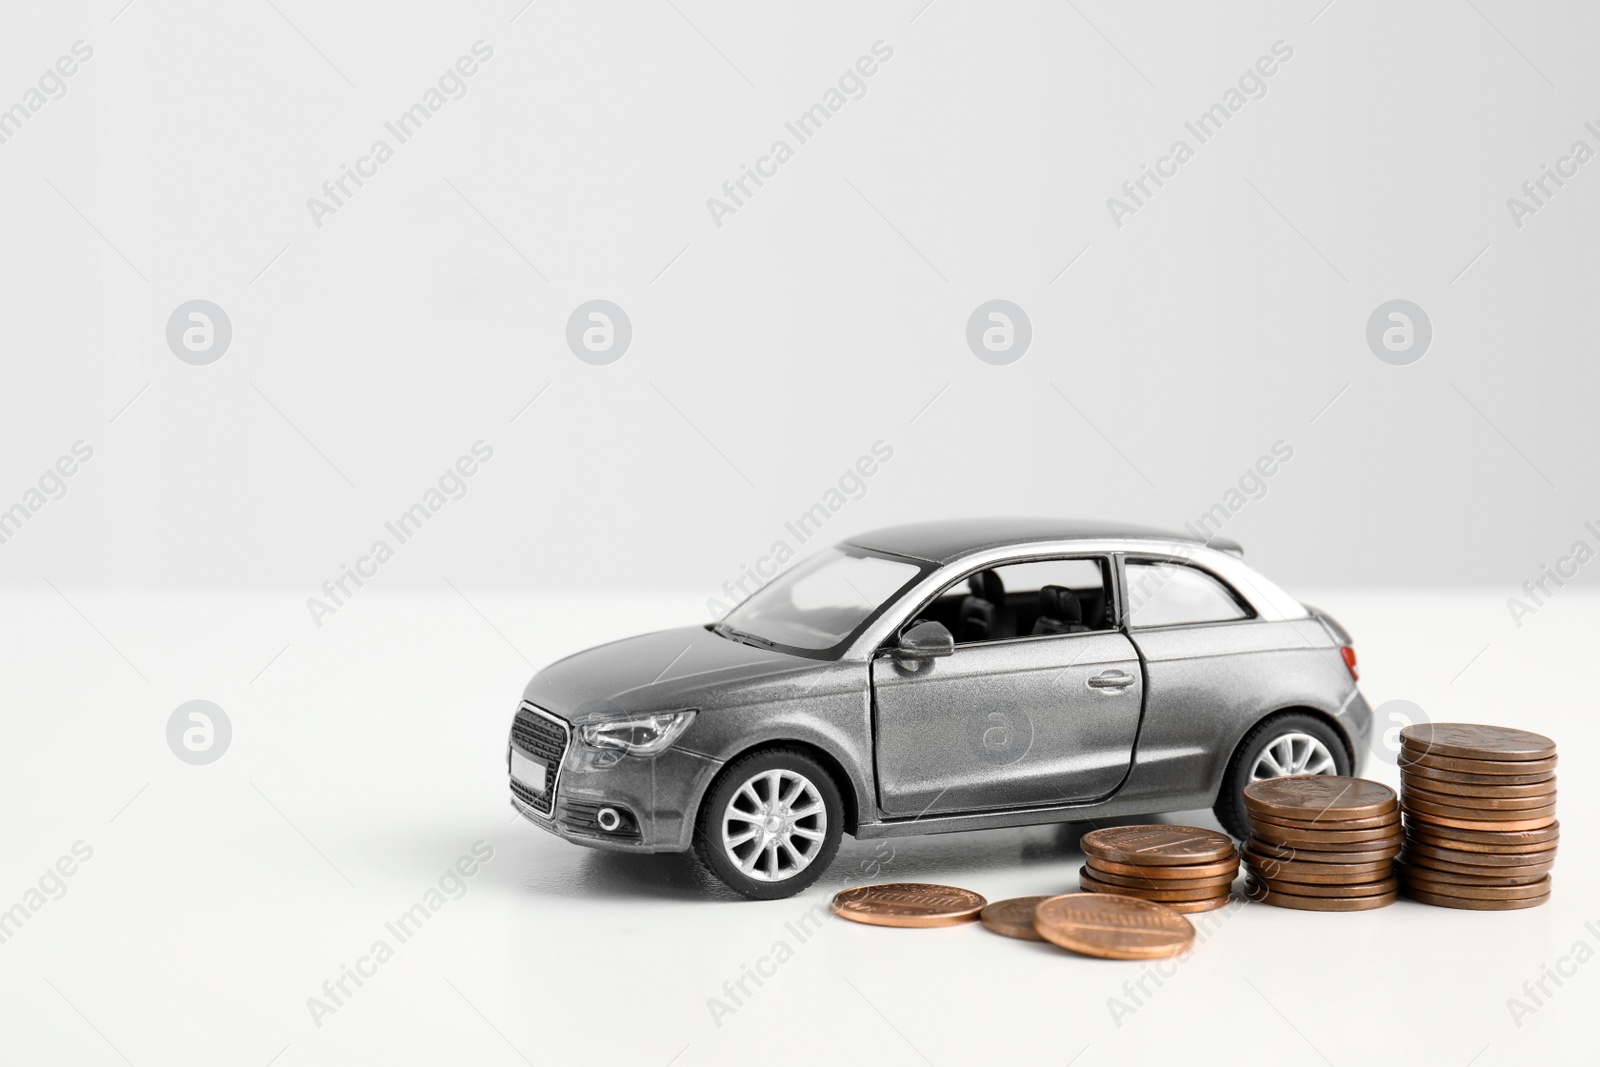 Photo of Toy car and money on white background, space for text. Vehicle insurance